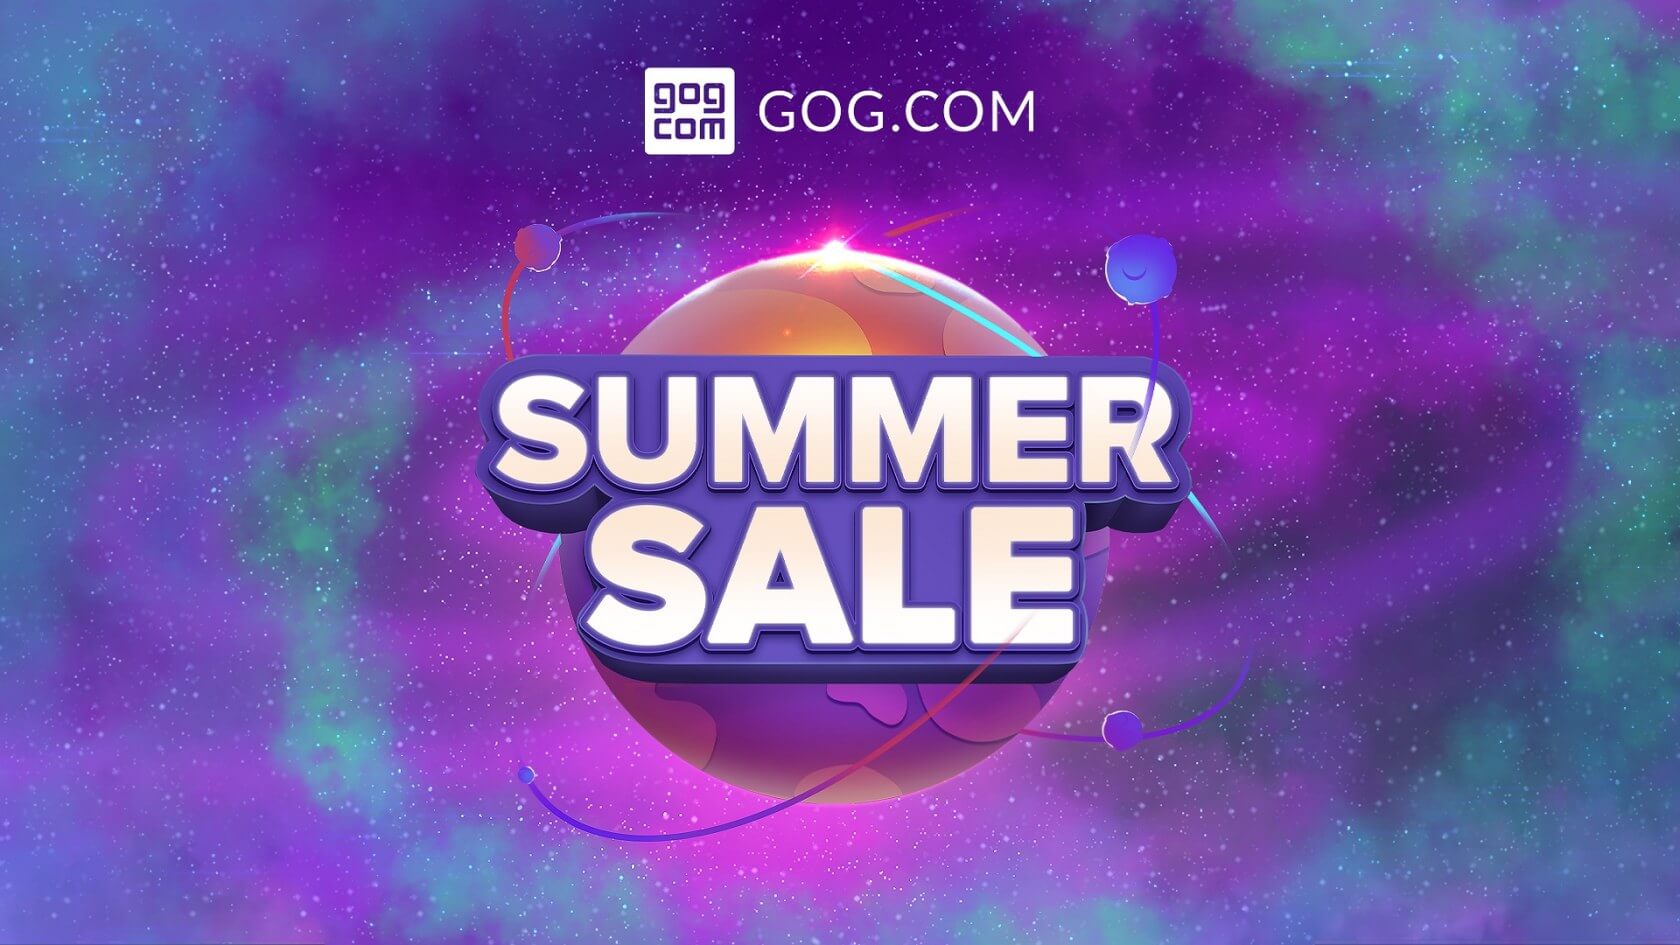 GOG kicks off its biggest Summer Sale yet with game demos and publisher bundles